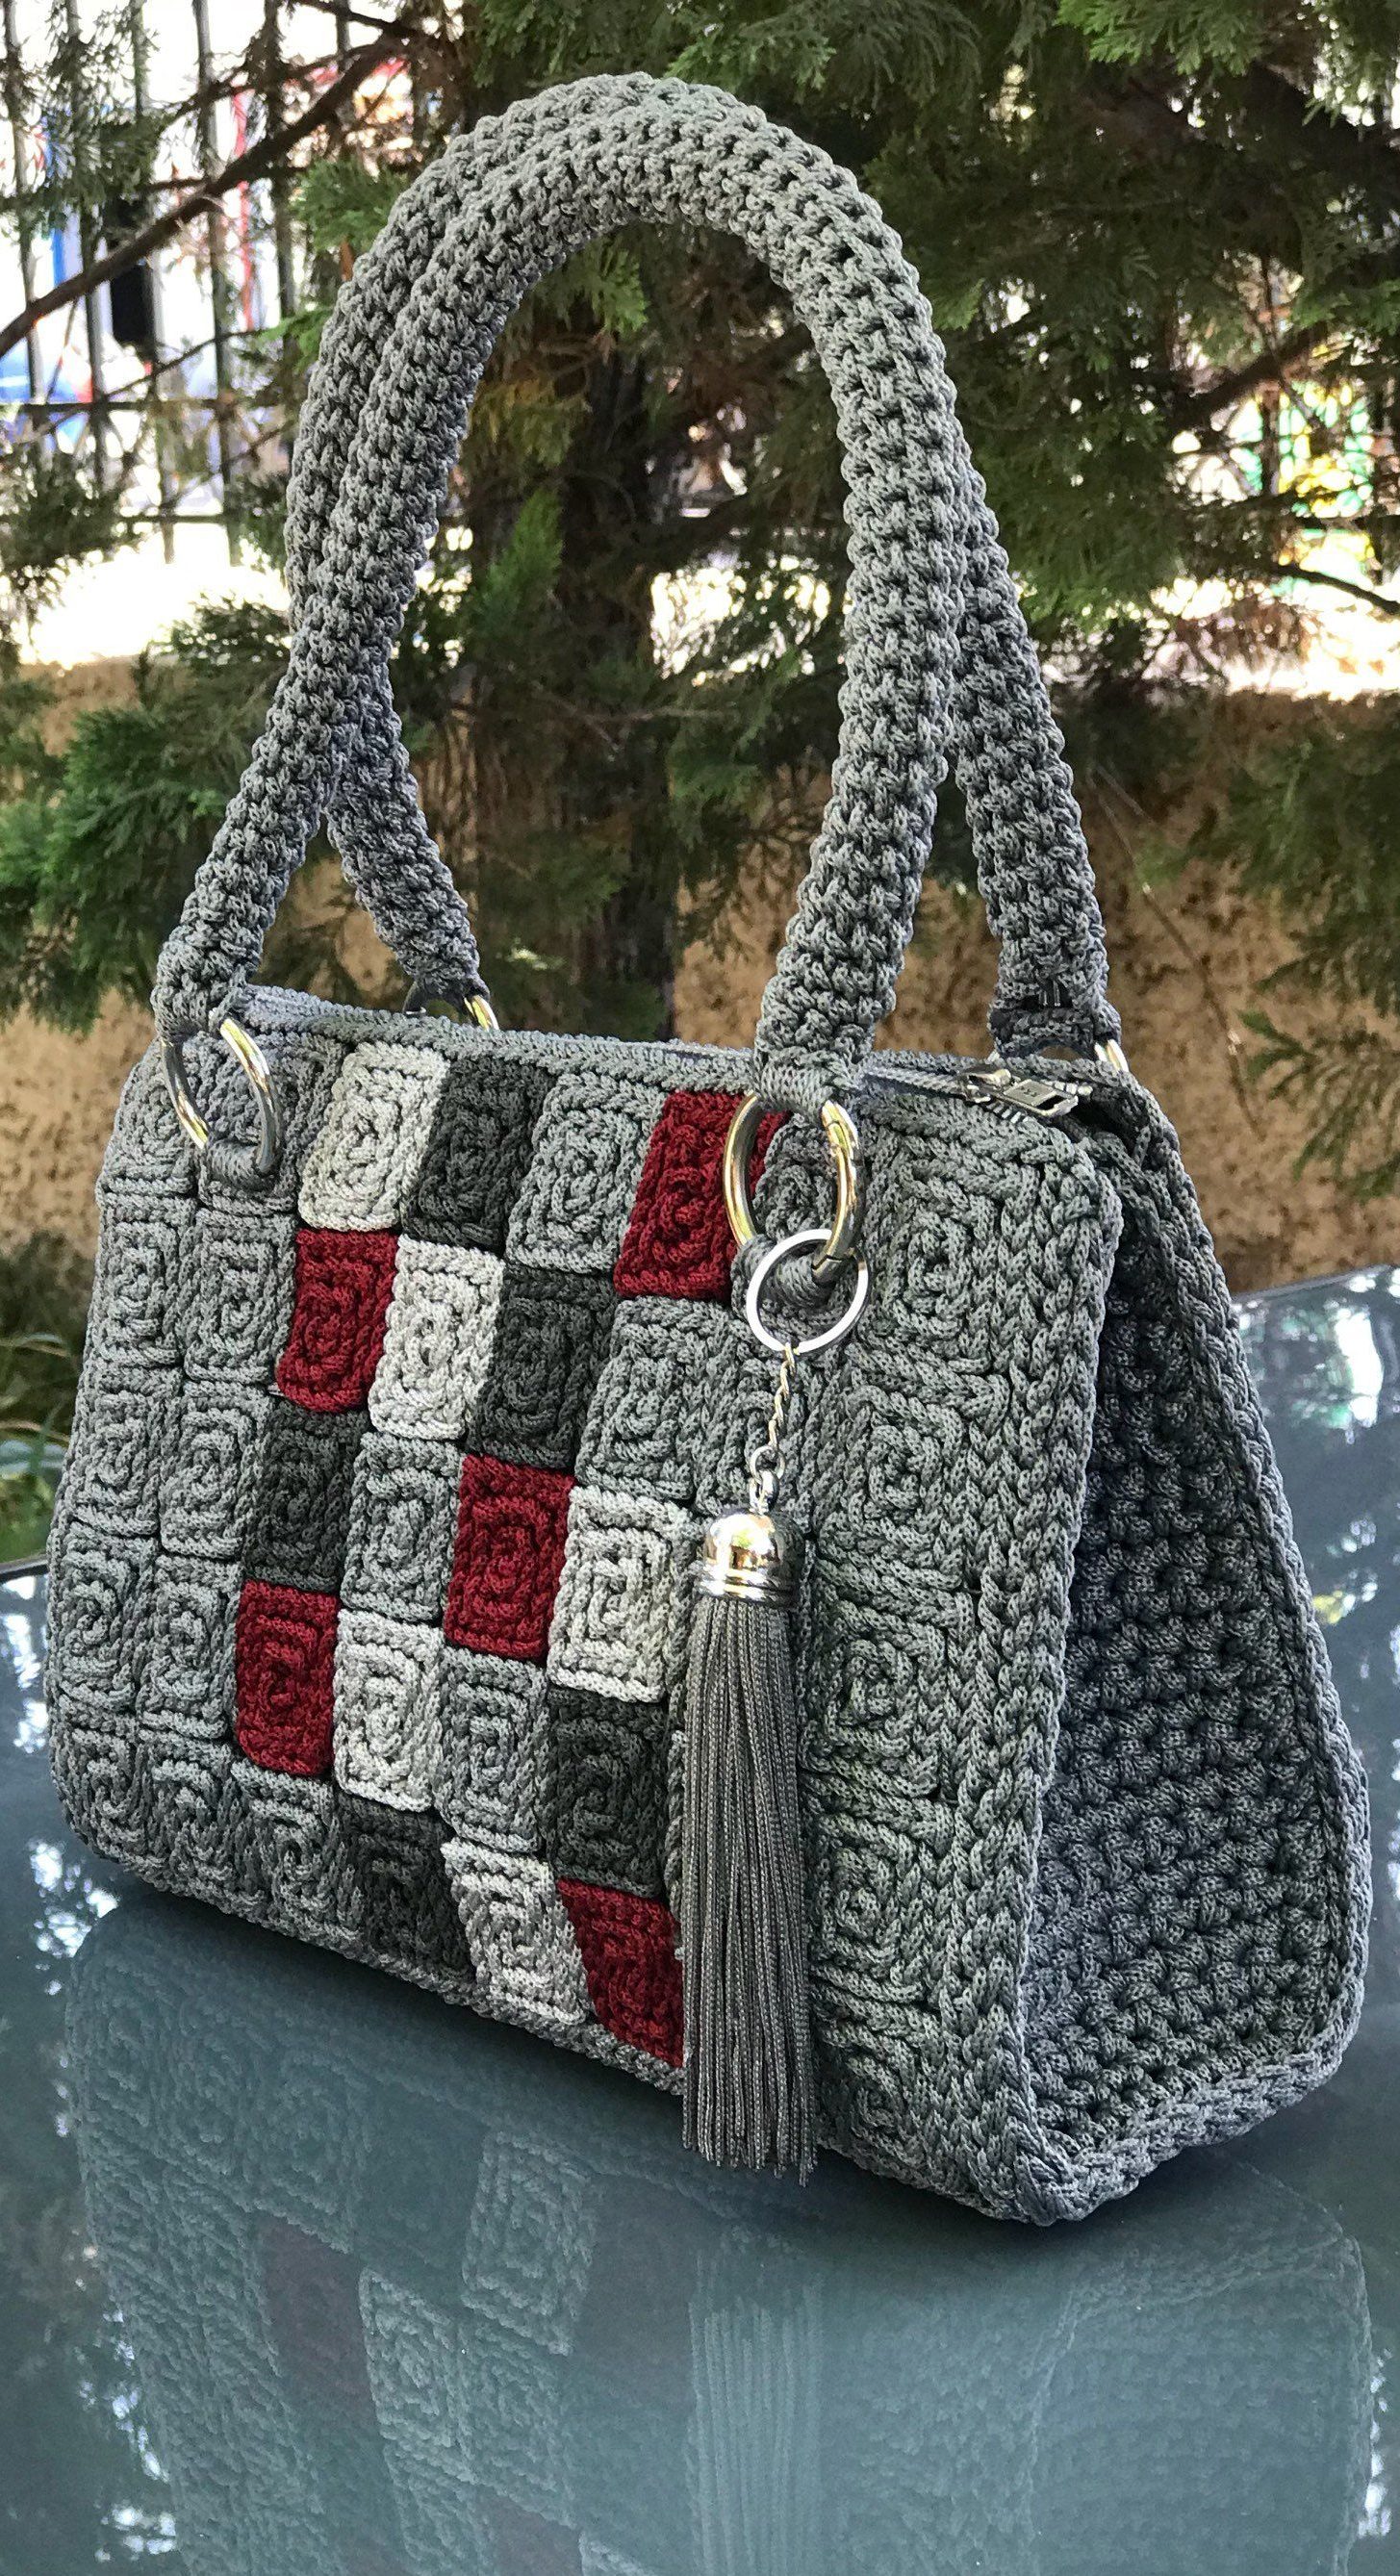 60+ Daily Useful and Cool Crochet Bag Pattern Ideas - Page 17 of 60